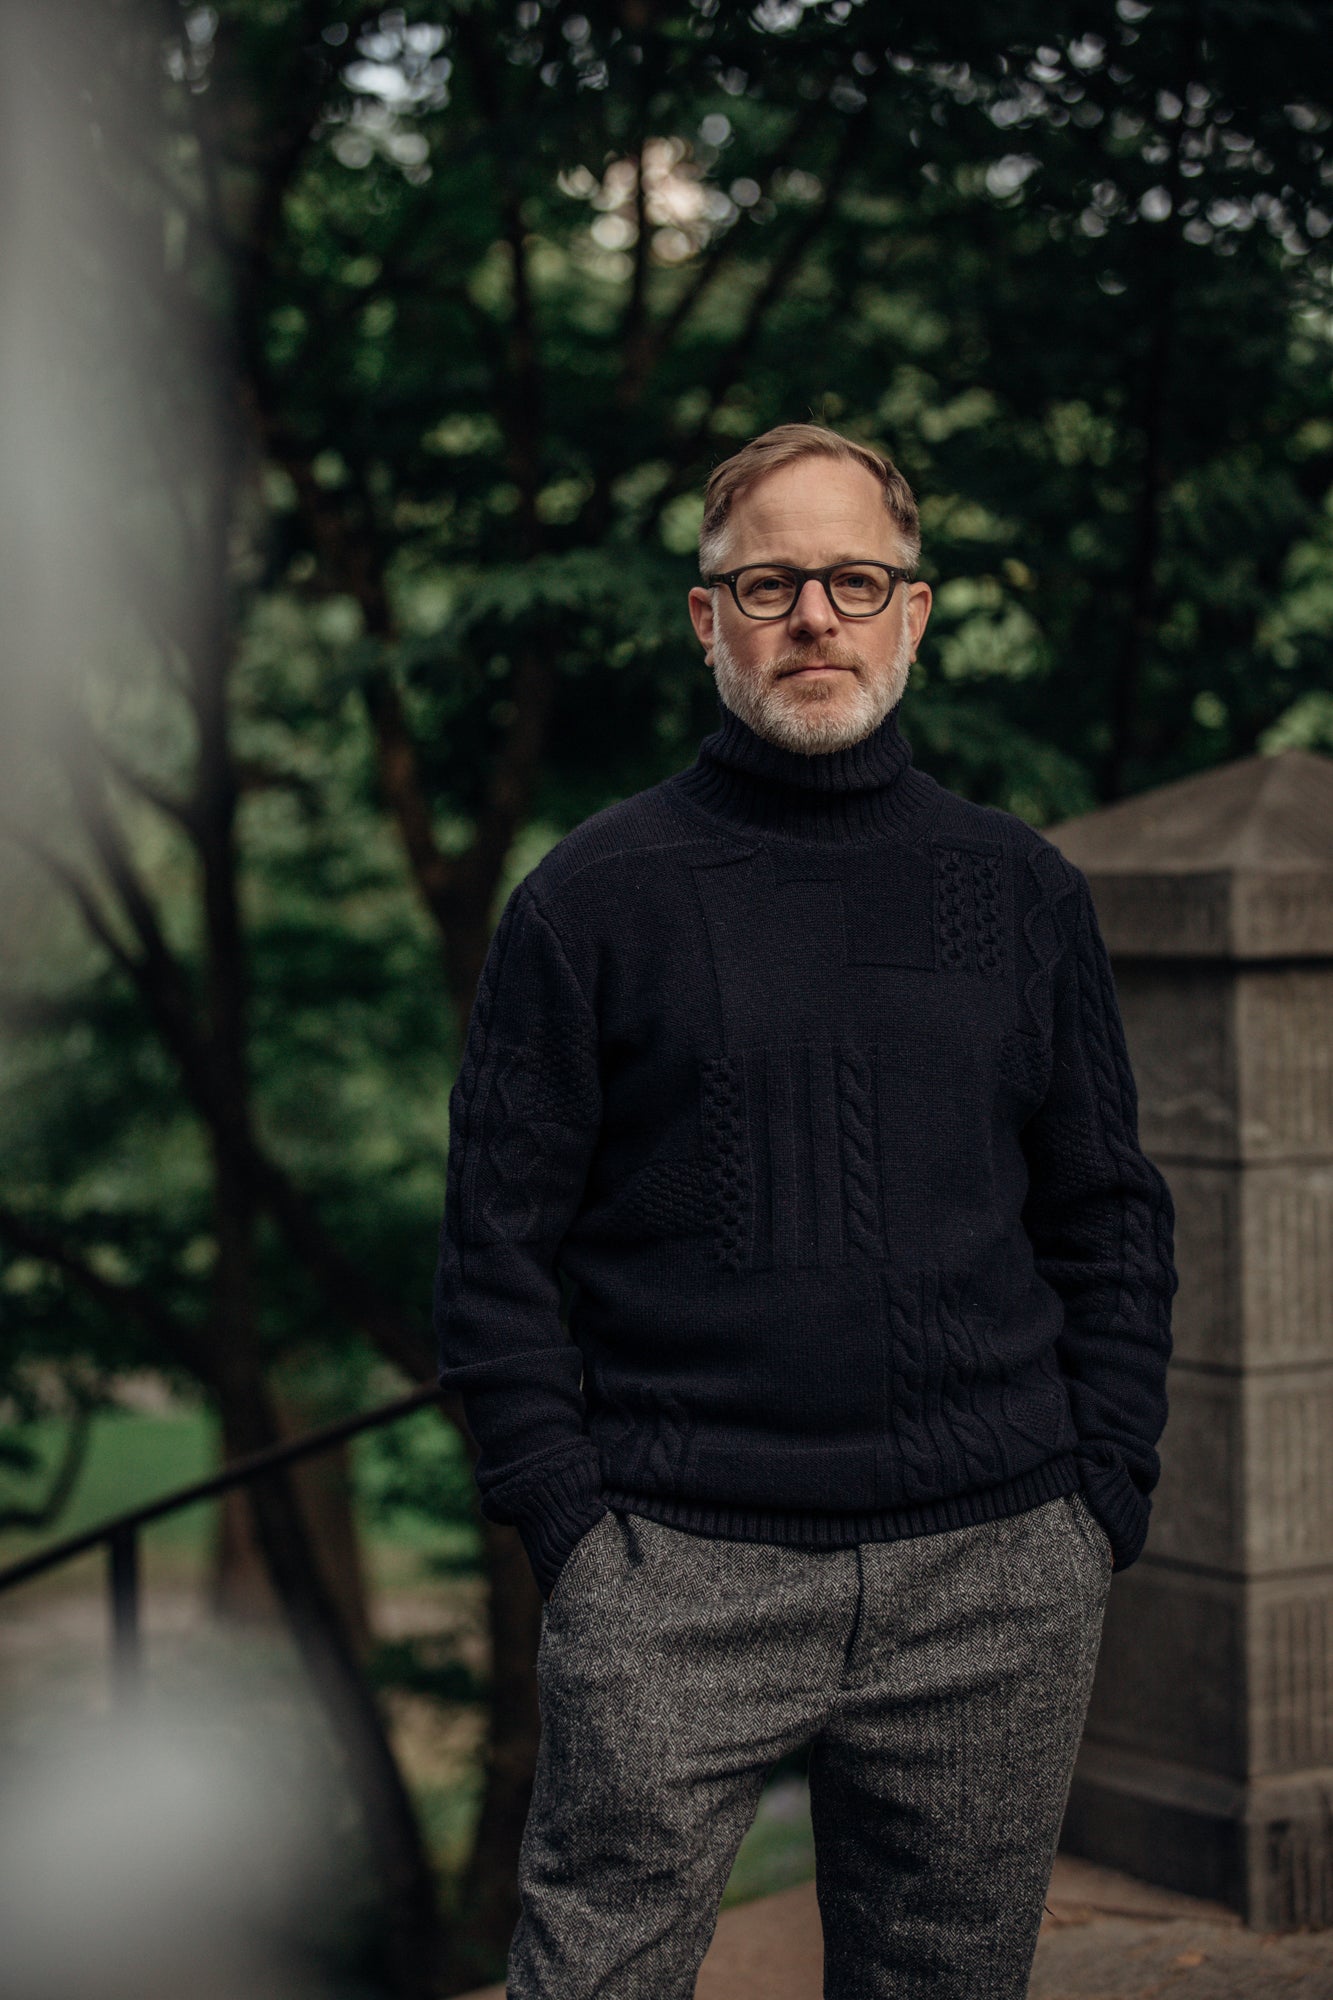 A man stands in a park wearing glasses and a black knit sweater.